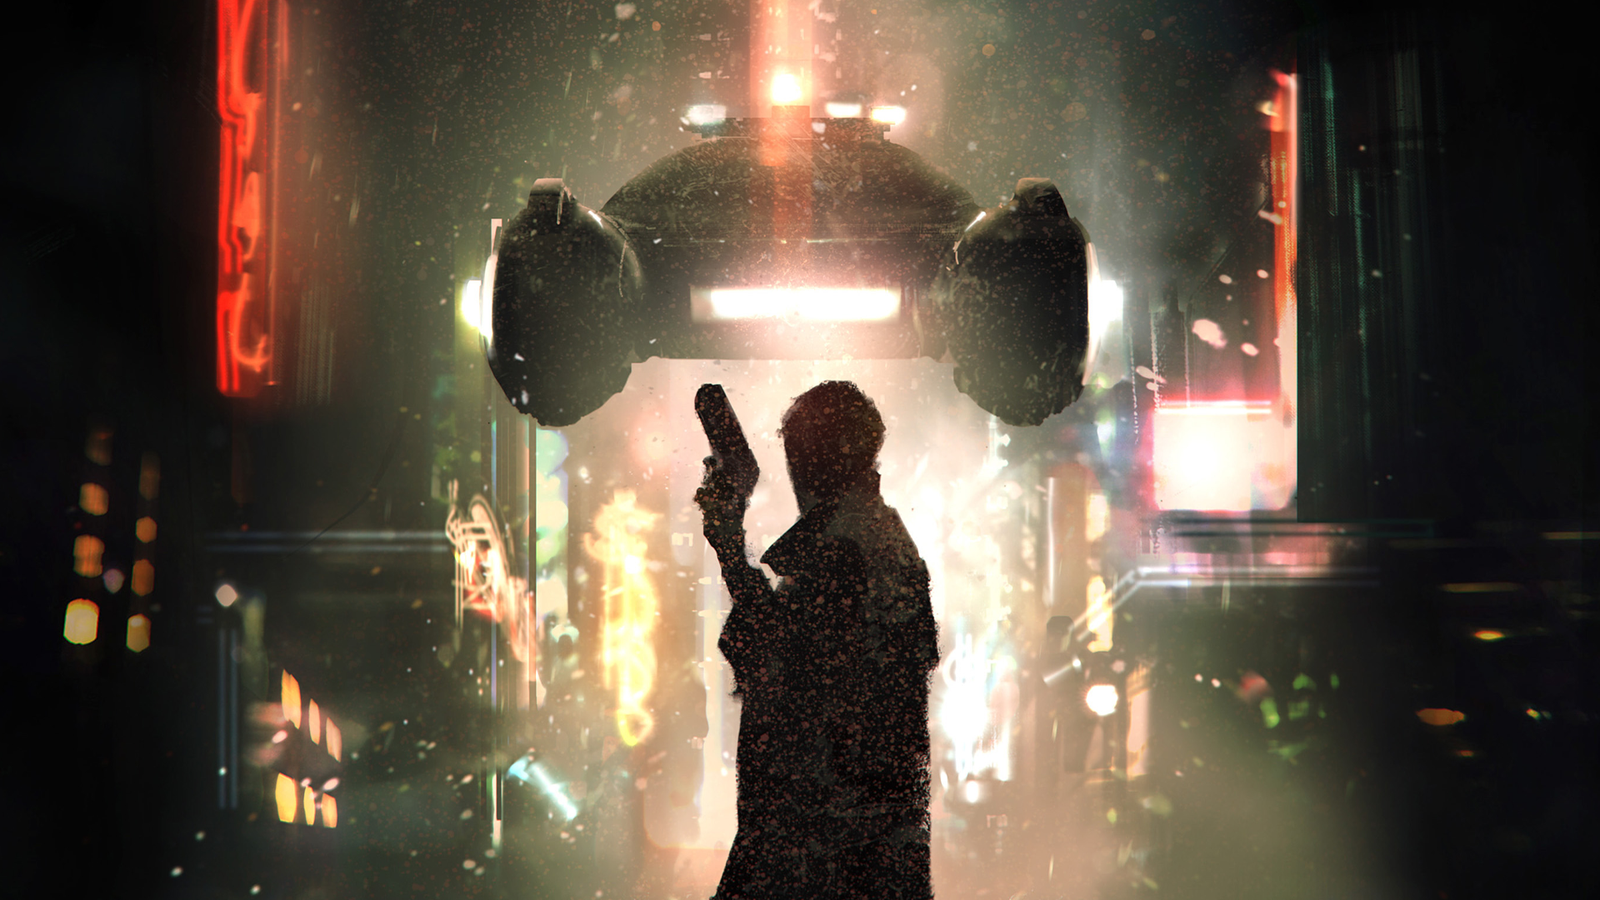 Blade Runner: The Role Playing Game' Gives You the Tools to Live